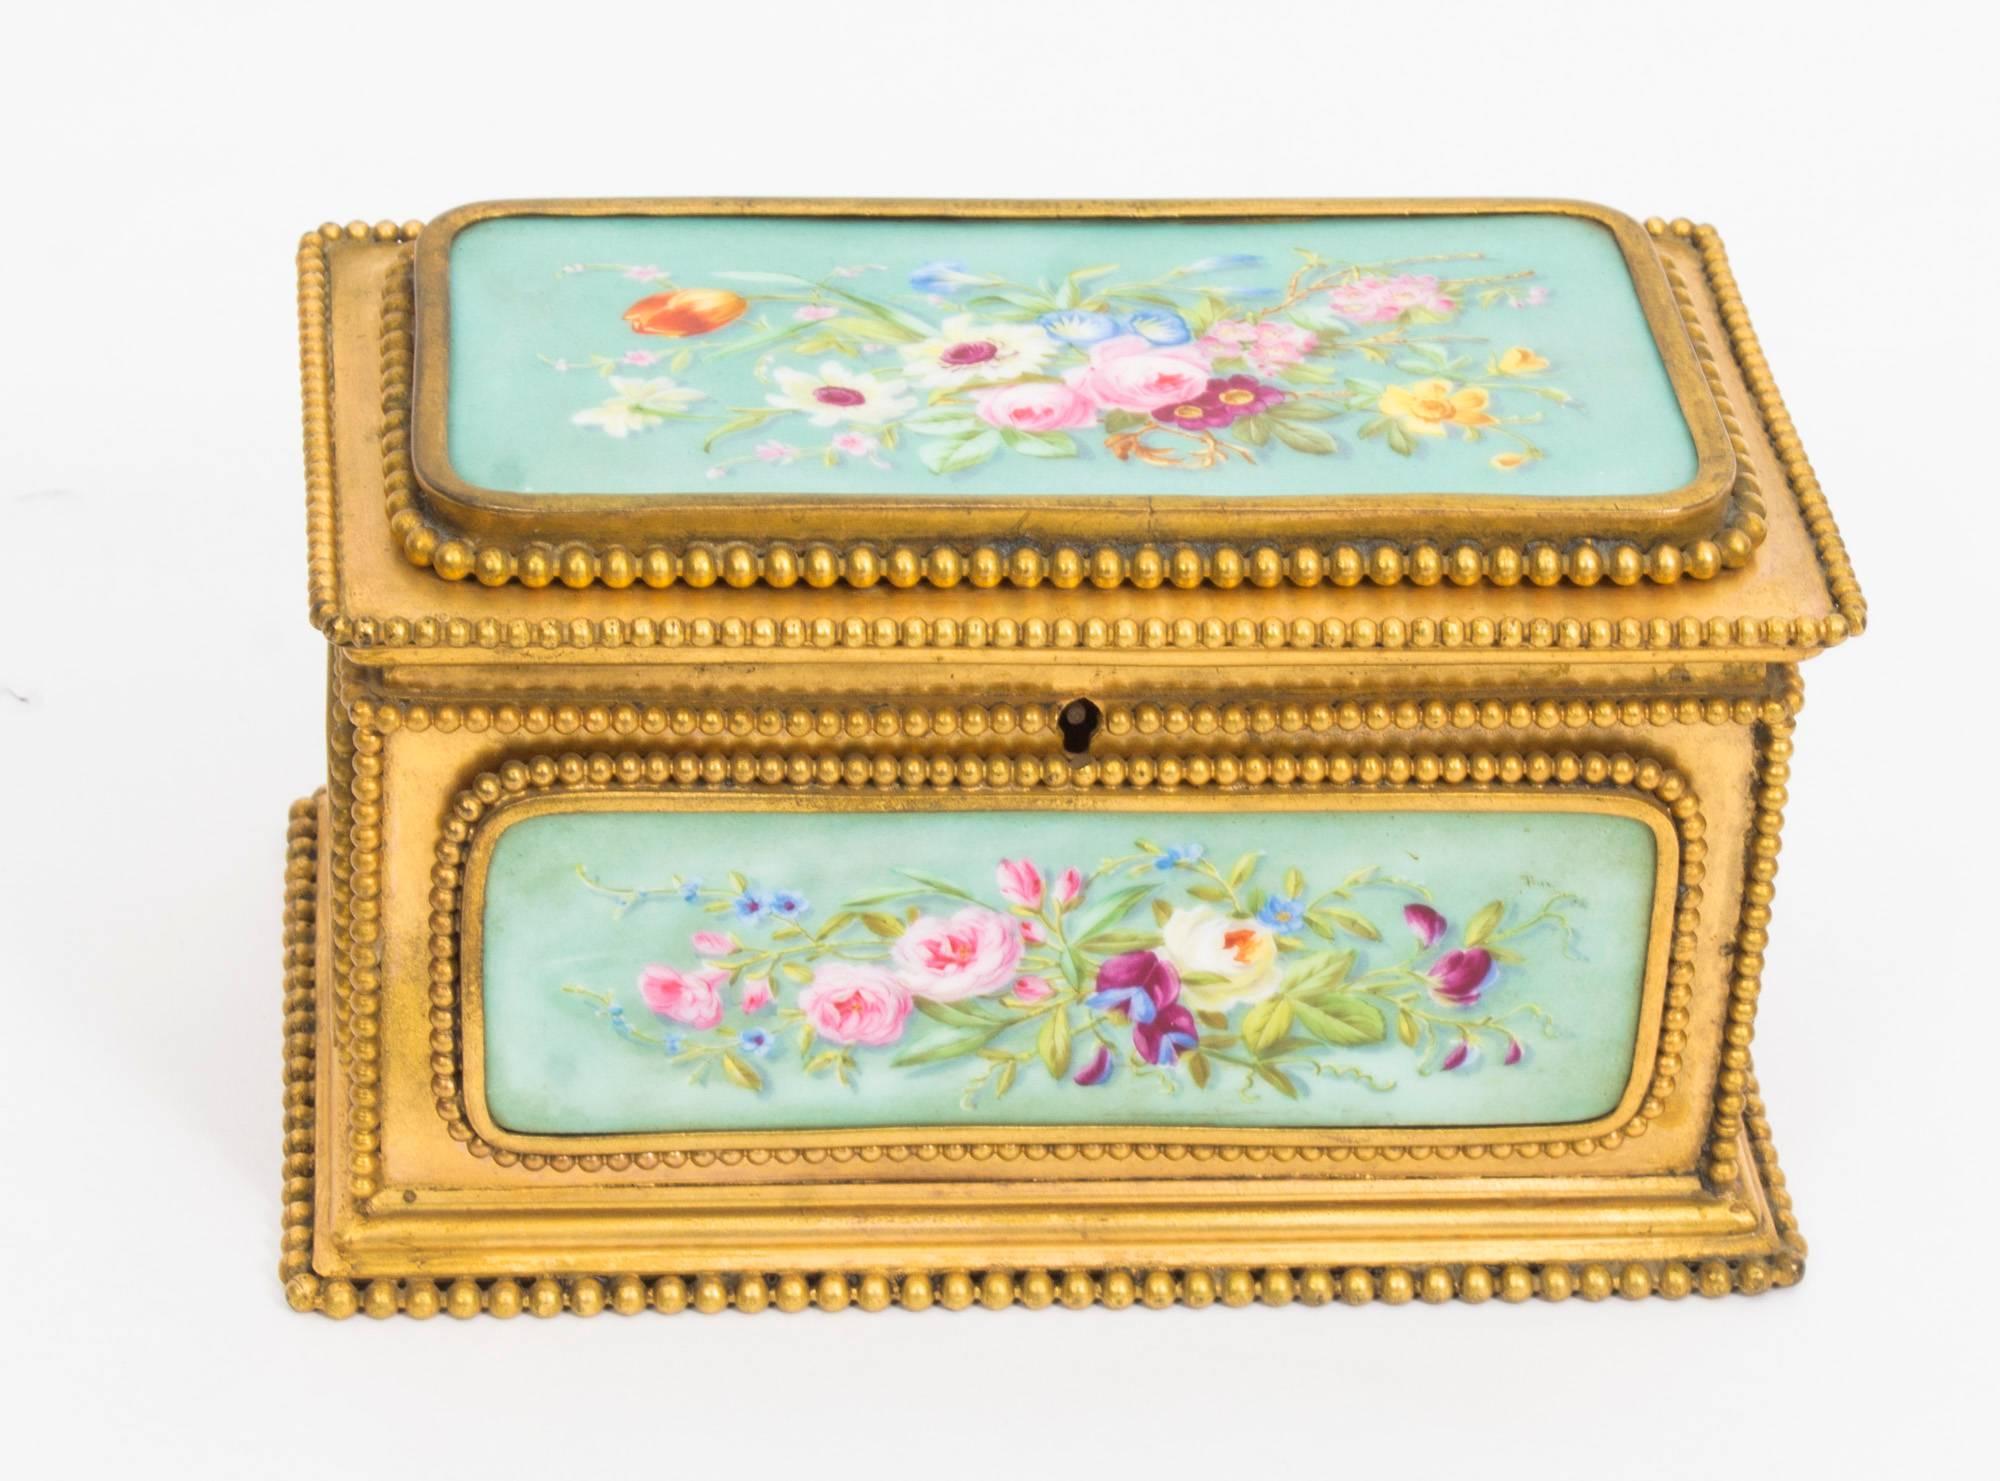 A French porcelain and gilt metal mounted casket, Tahan à Paris, the porcelain panels painted flowers on a turquoise ground, beaded borders, 17cm wide.

This is a beautiful antique porcelain and ormolu-mounted rectangular shaped jewel casket, by